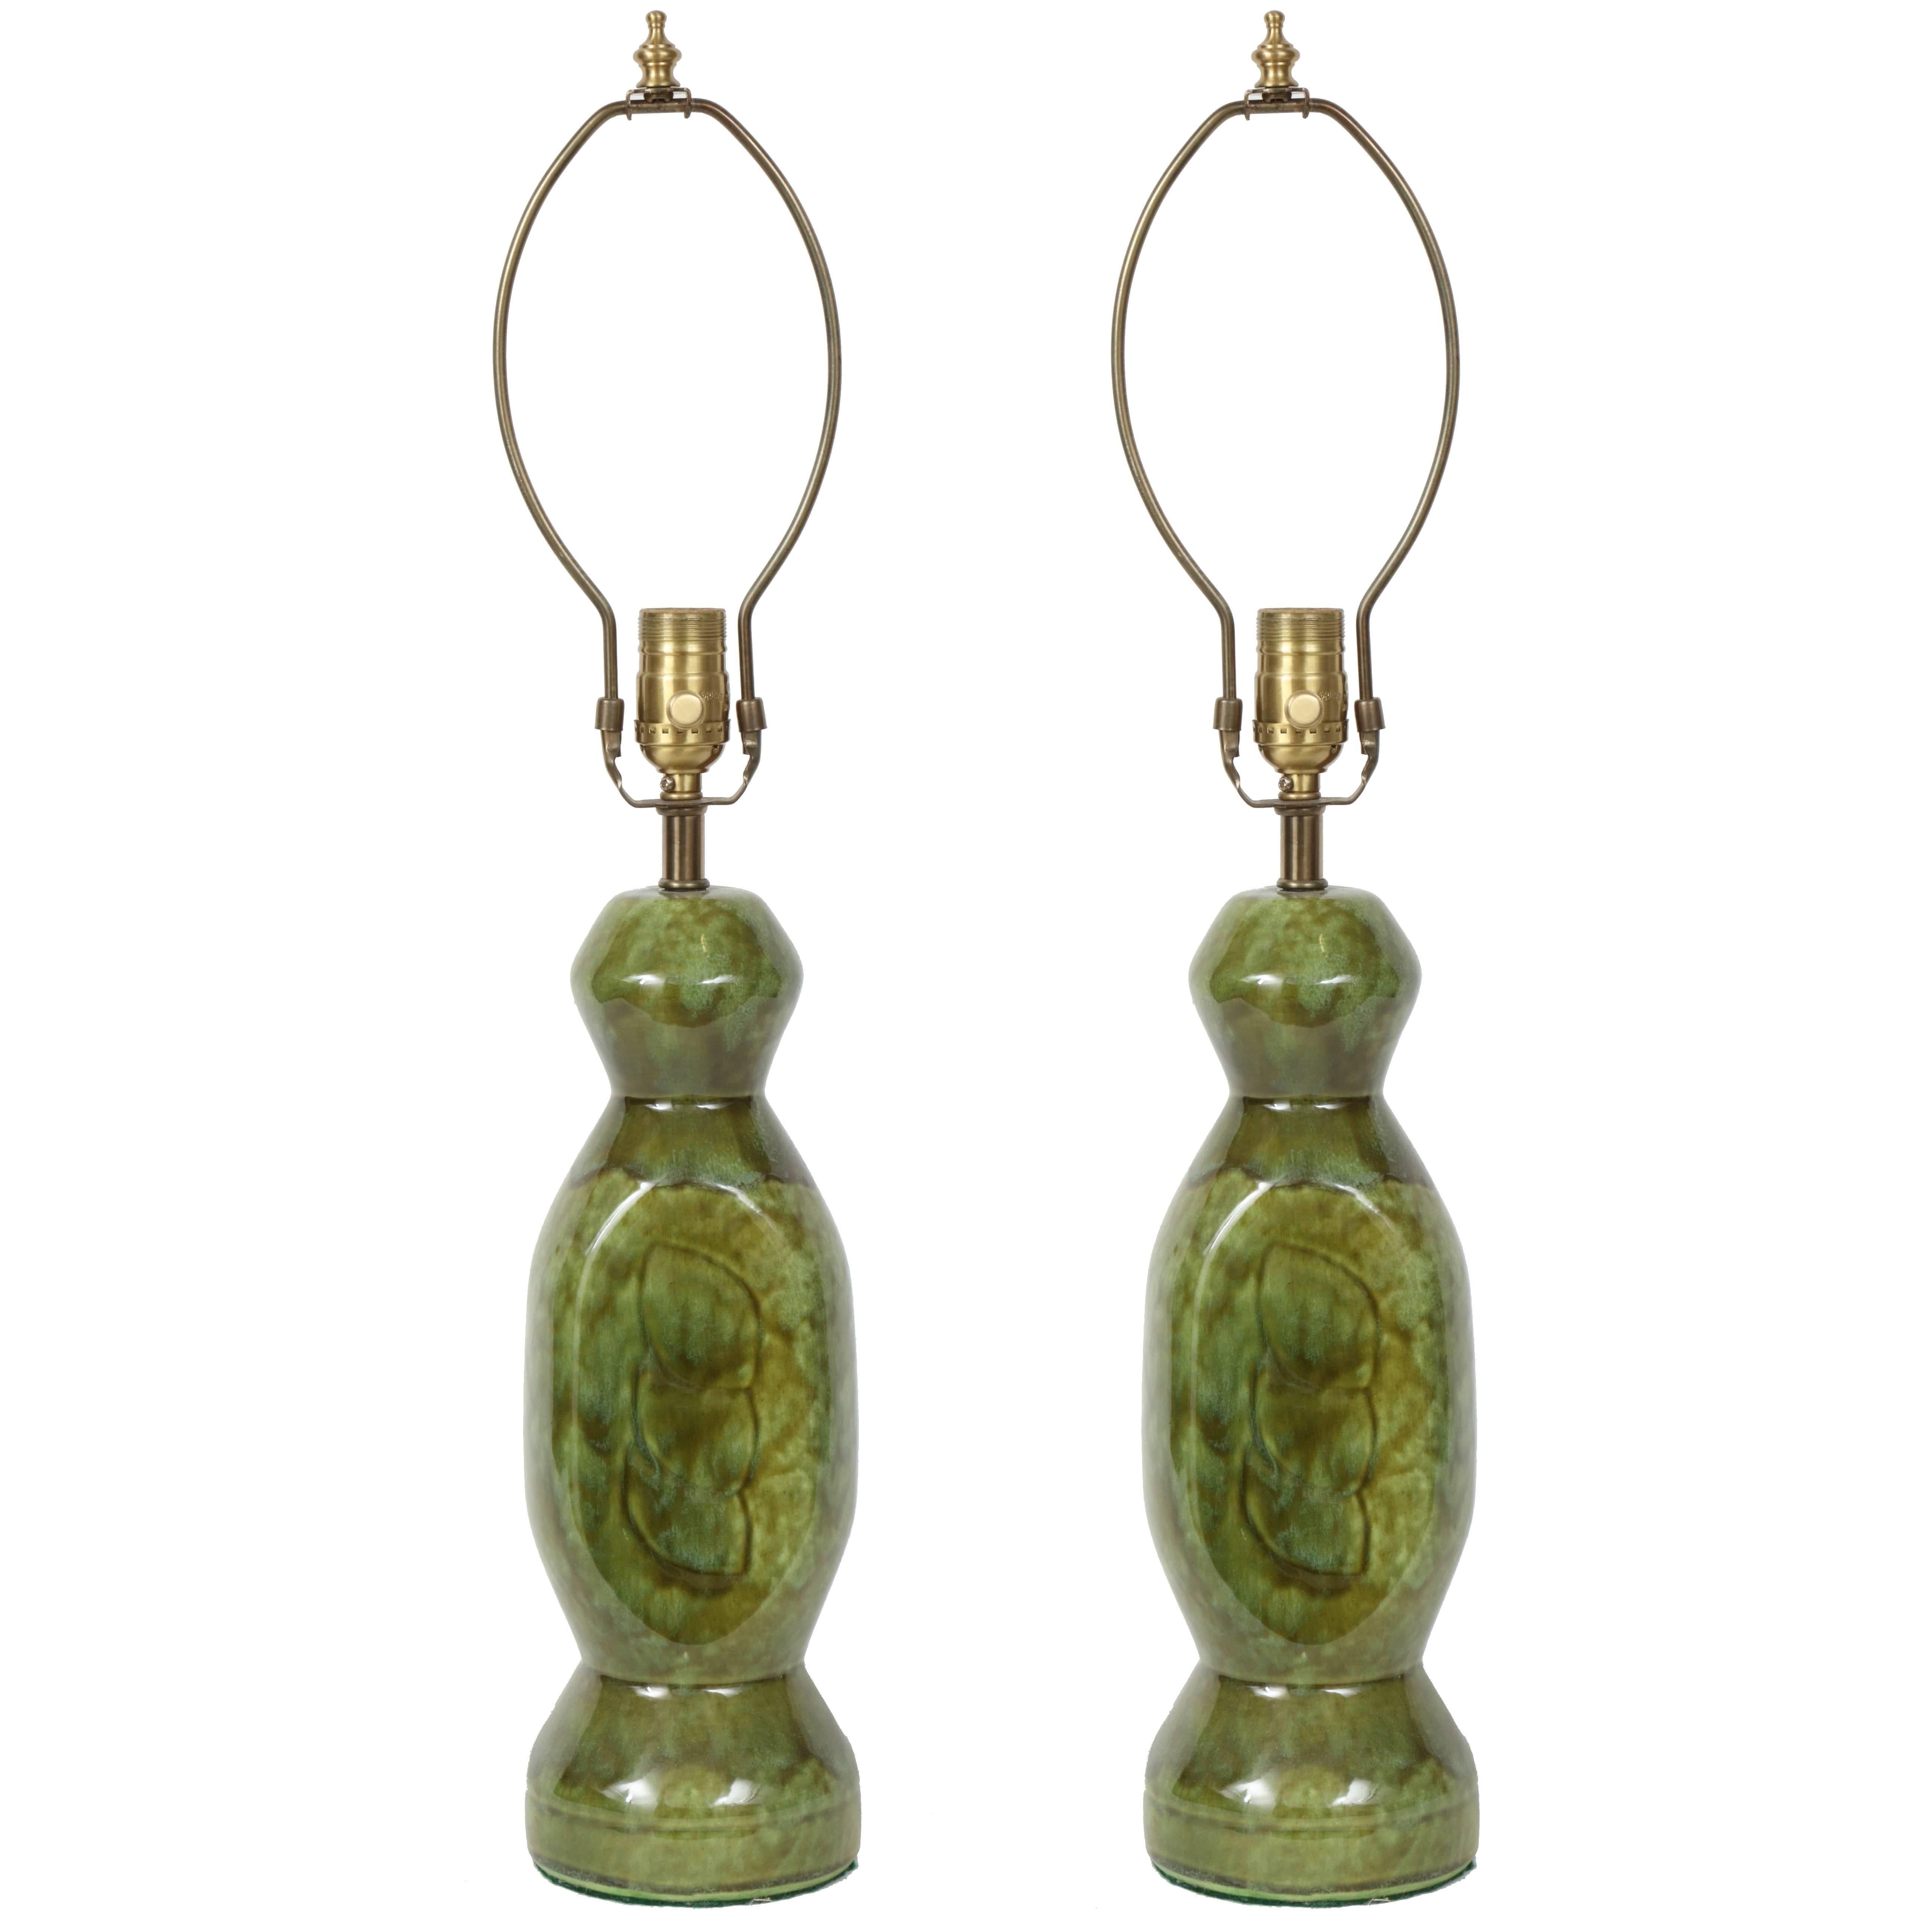 Pair of French 1940s Mottled Green Ceramic Lamps